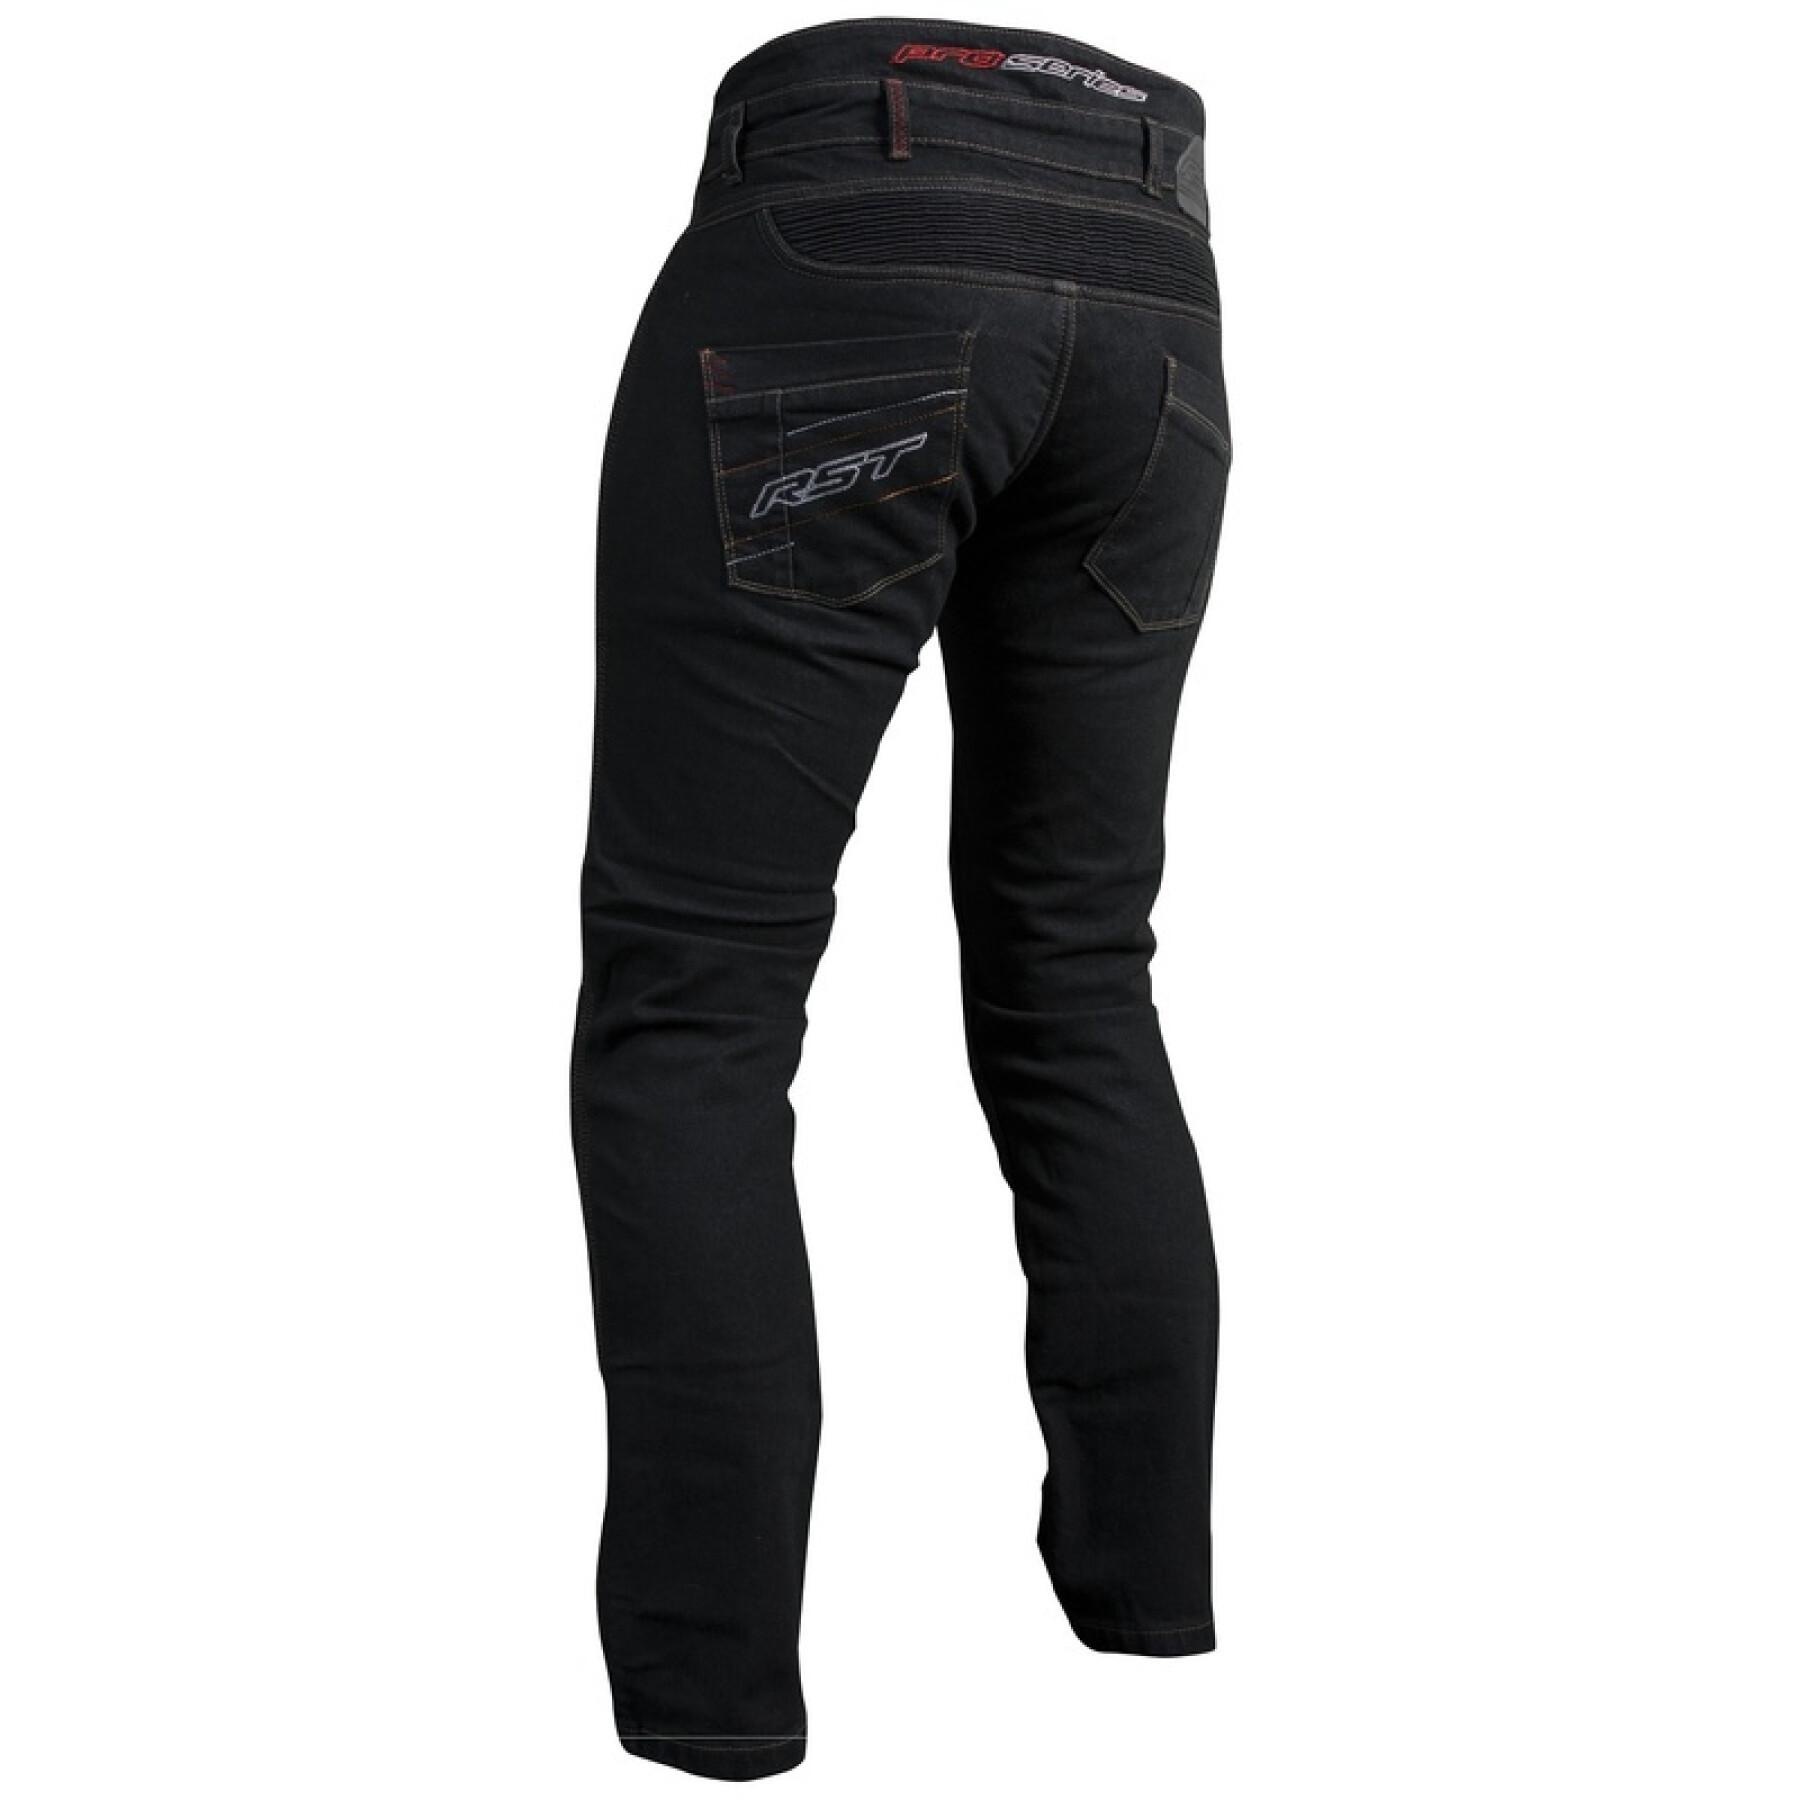 Motorcycle jeans RST x Kevlar® Aramid Tech Pro CE